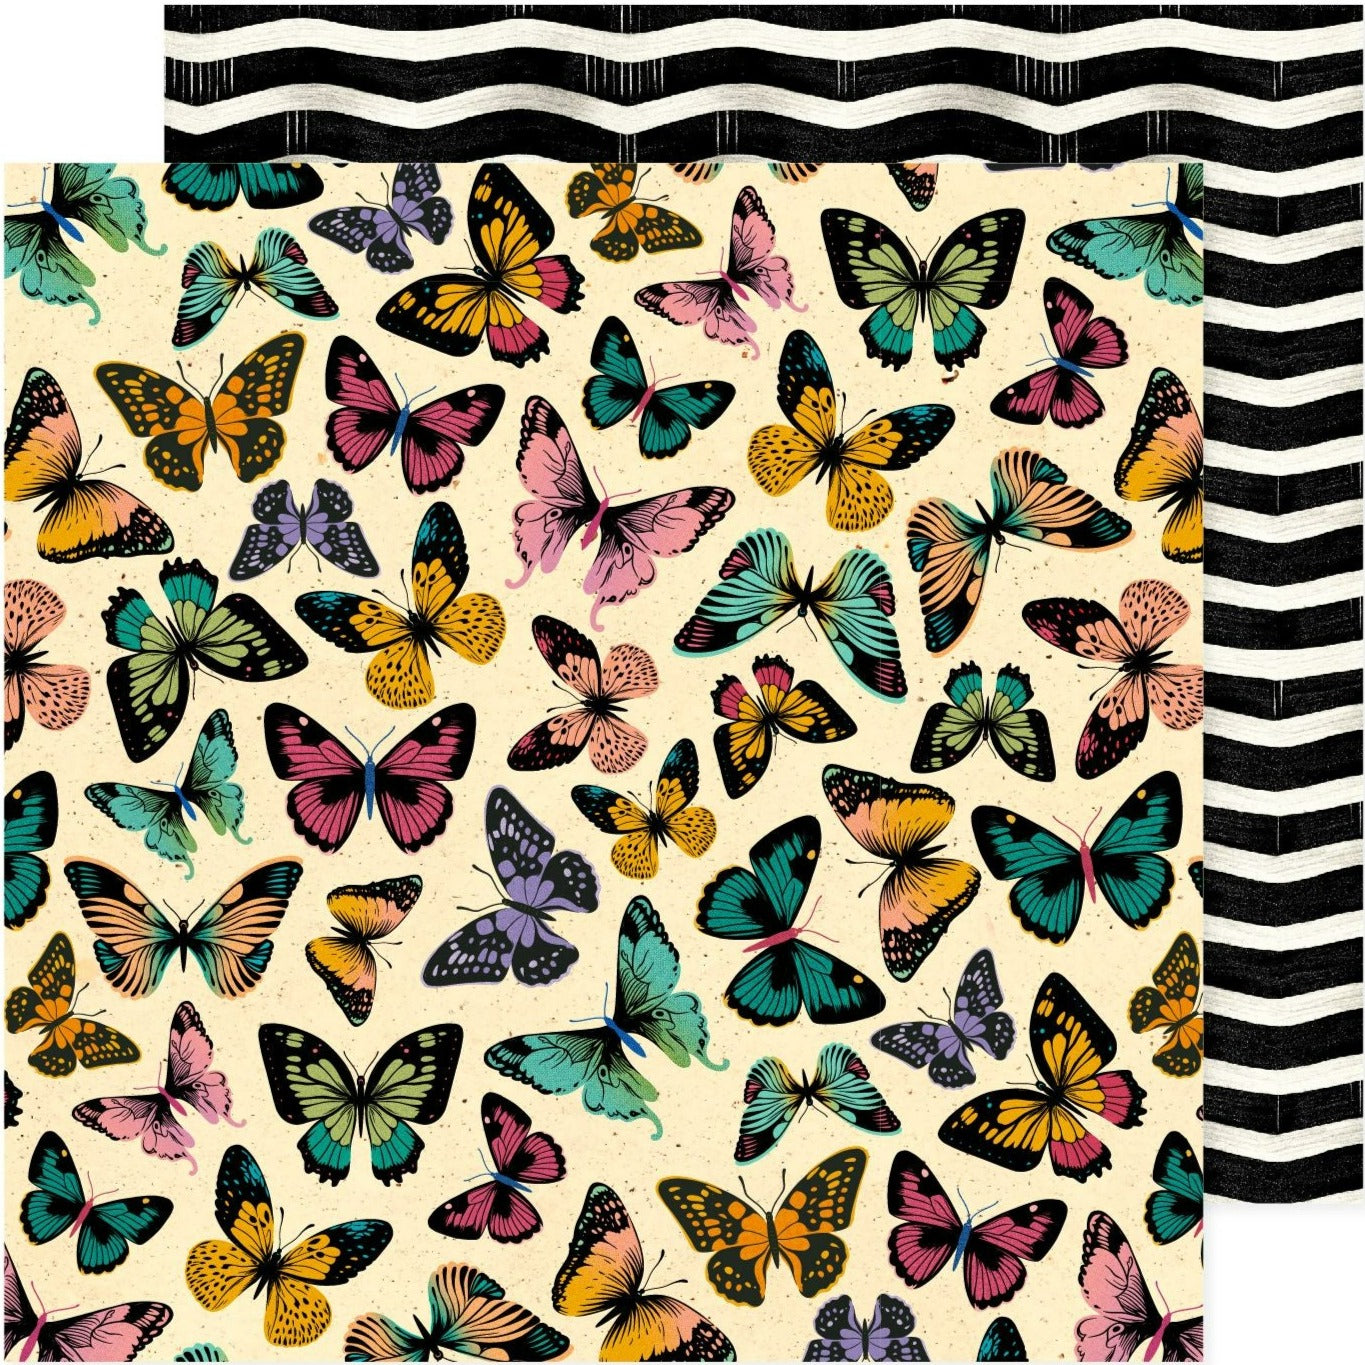 12x12 patterned cardstock. (Side A - multi-colored butterflies on a cream background, Side B - black & white wavy lines) - Archival-safe and acid-free from American Crafts